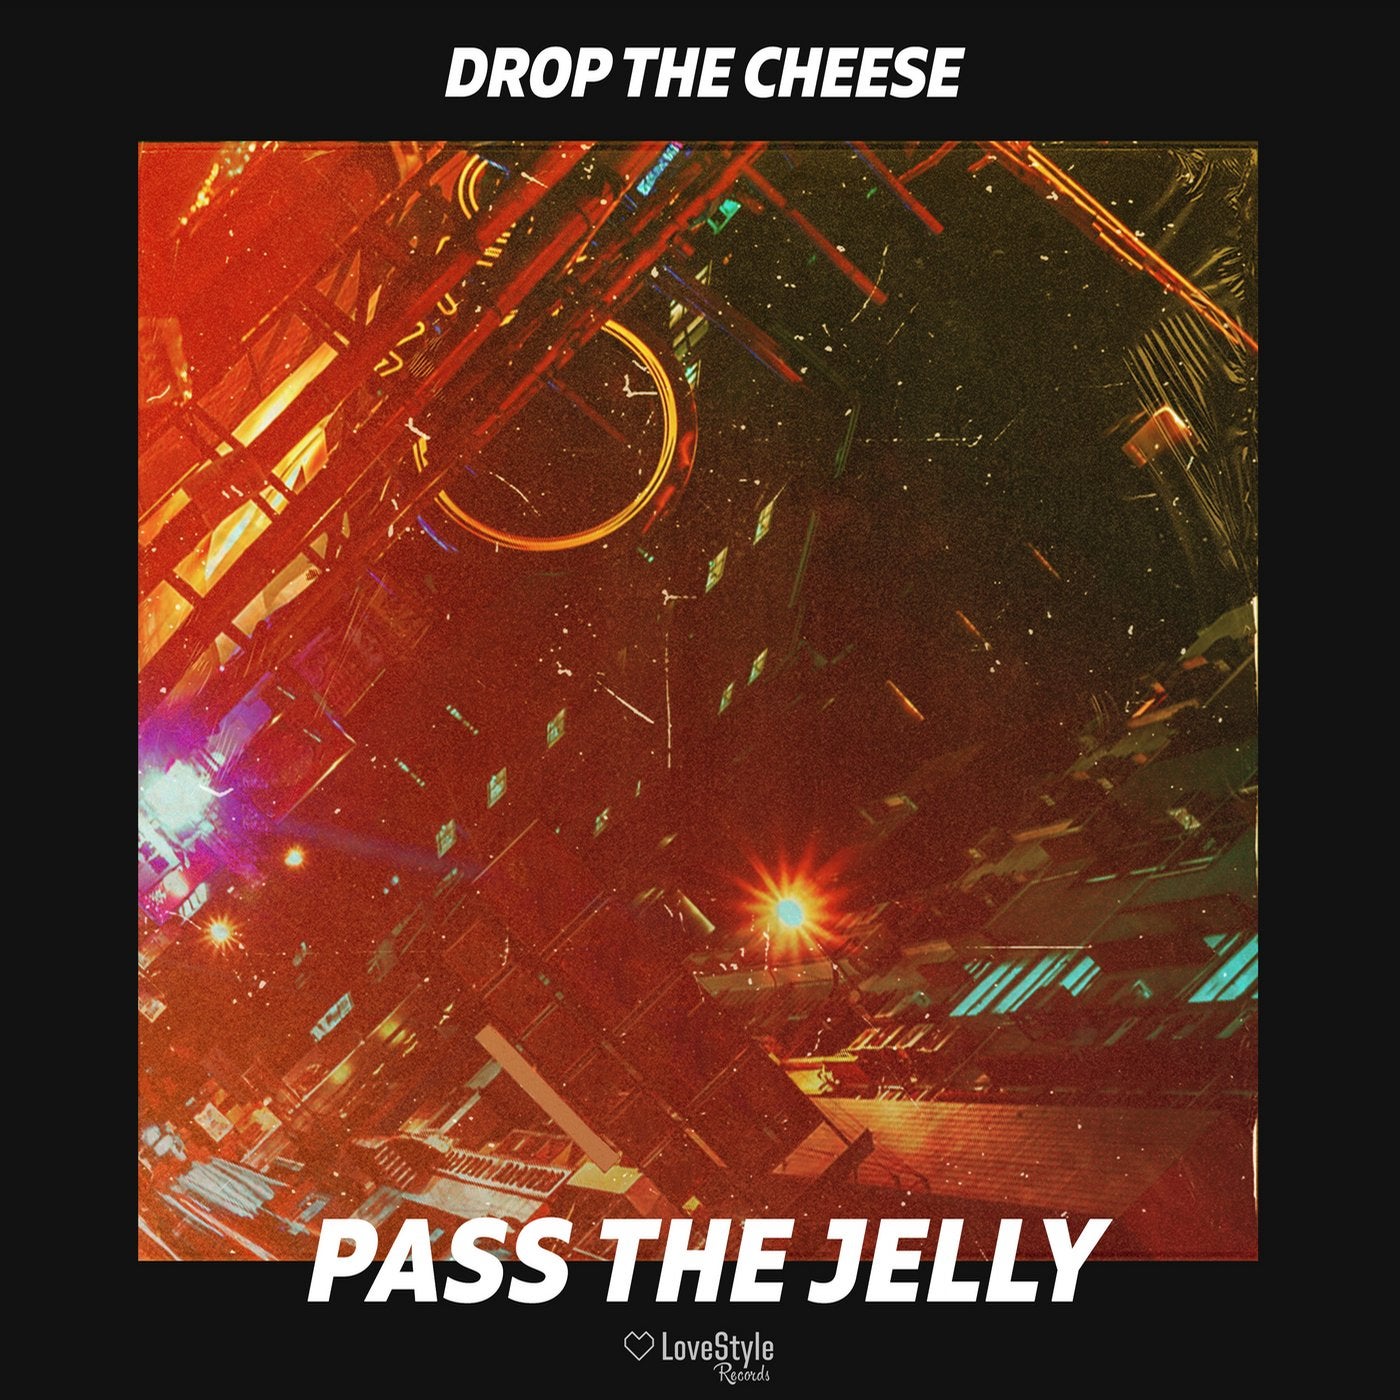 Pass the Jelly